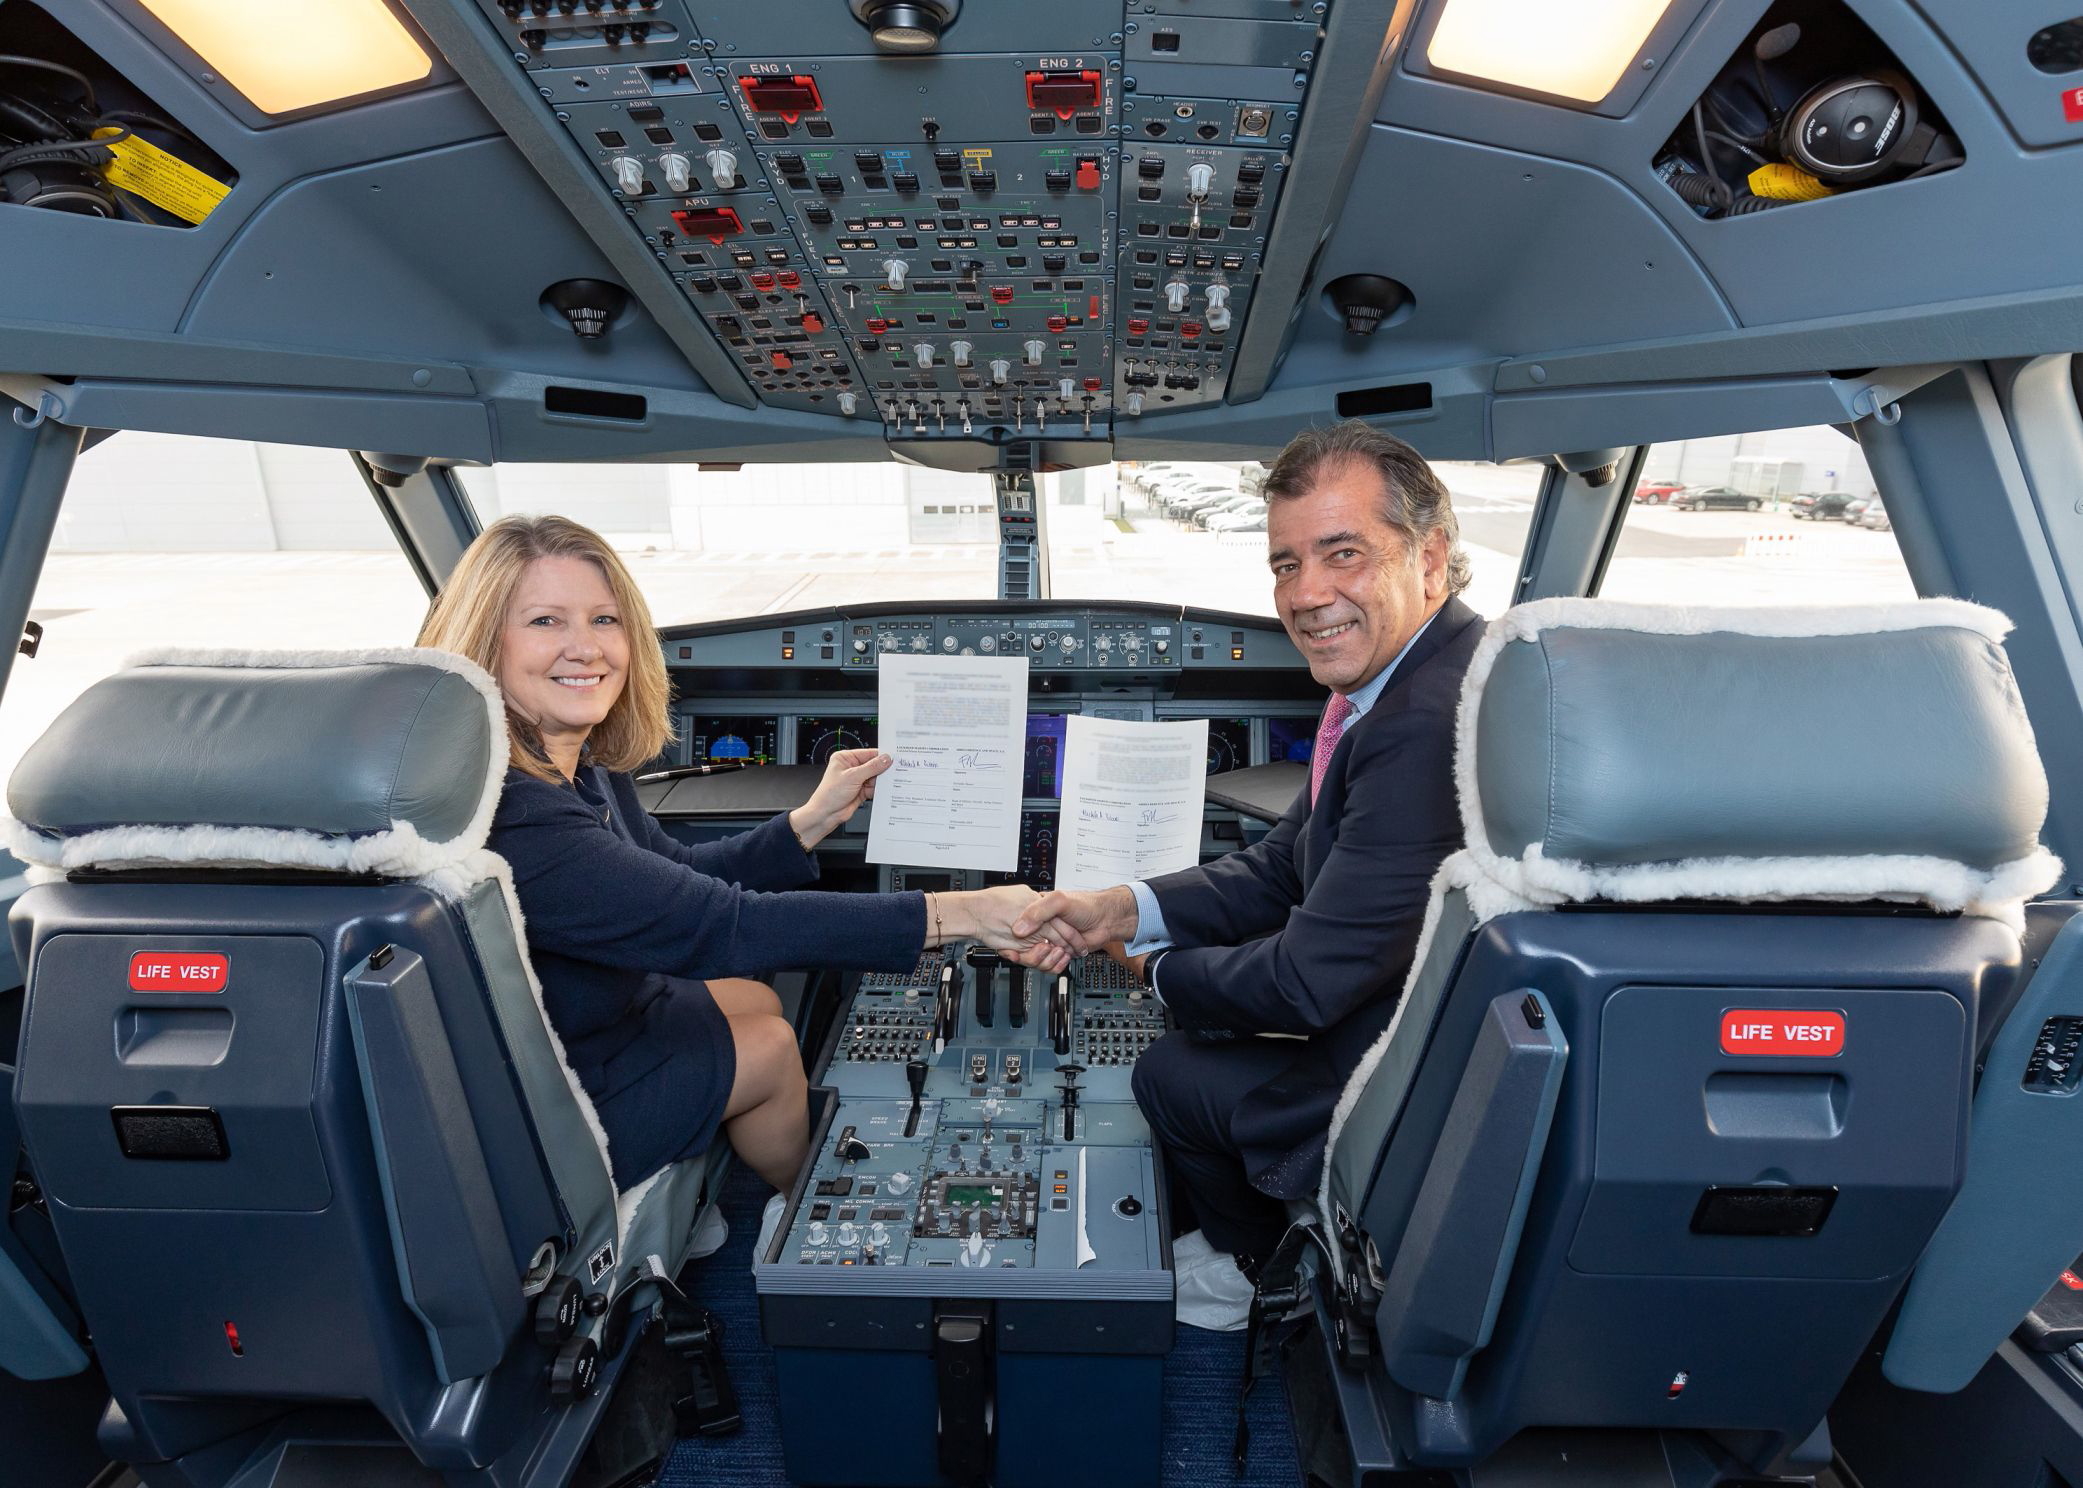 Michele Evans, Executive Vice President, Lockheed Martin Aeronautics, with Airbus Defence and Space Head of Military Aircraft, Fernando Alonso, in the cockpit of an Airbus A330 Multi Role Tanker Transport (A330 MRTT). Click to enlarge.